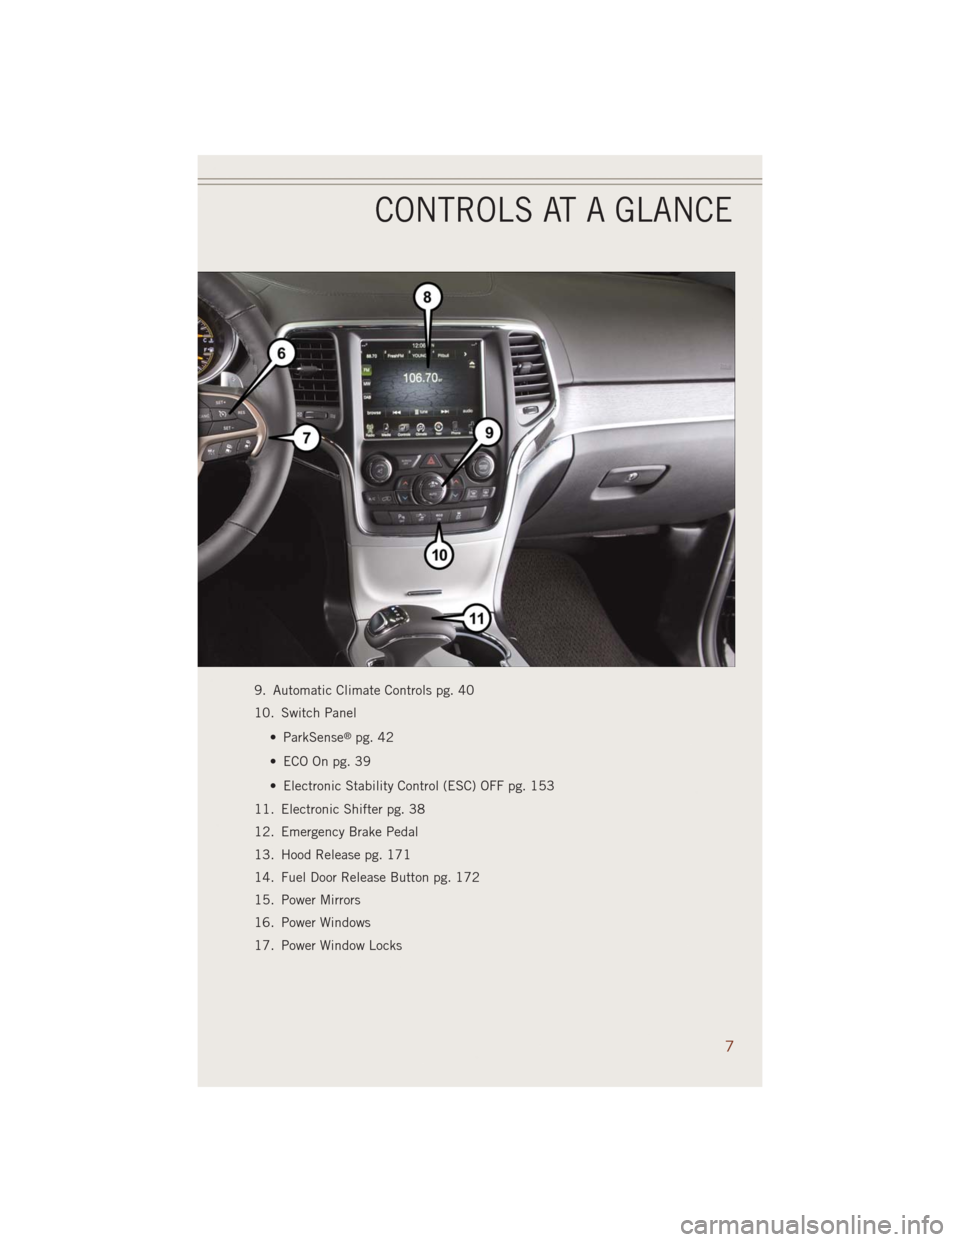 JEEP GRAND CHEROKEE 2014 WK2 / 4.G User Guide 9. Automatic Climate Controls pg. 40
10. Switch Panel
• ParkSense
®pg. 42
• ECO On pg. 39
• Electronic Stability Control (ESC) OFF pg. 153
11. Electronic Shifter pg. 38
12. Emergency Brake Peda